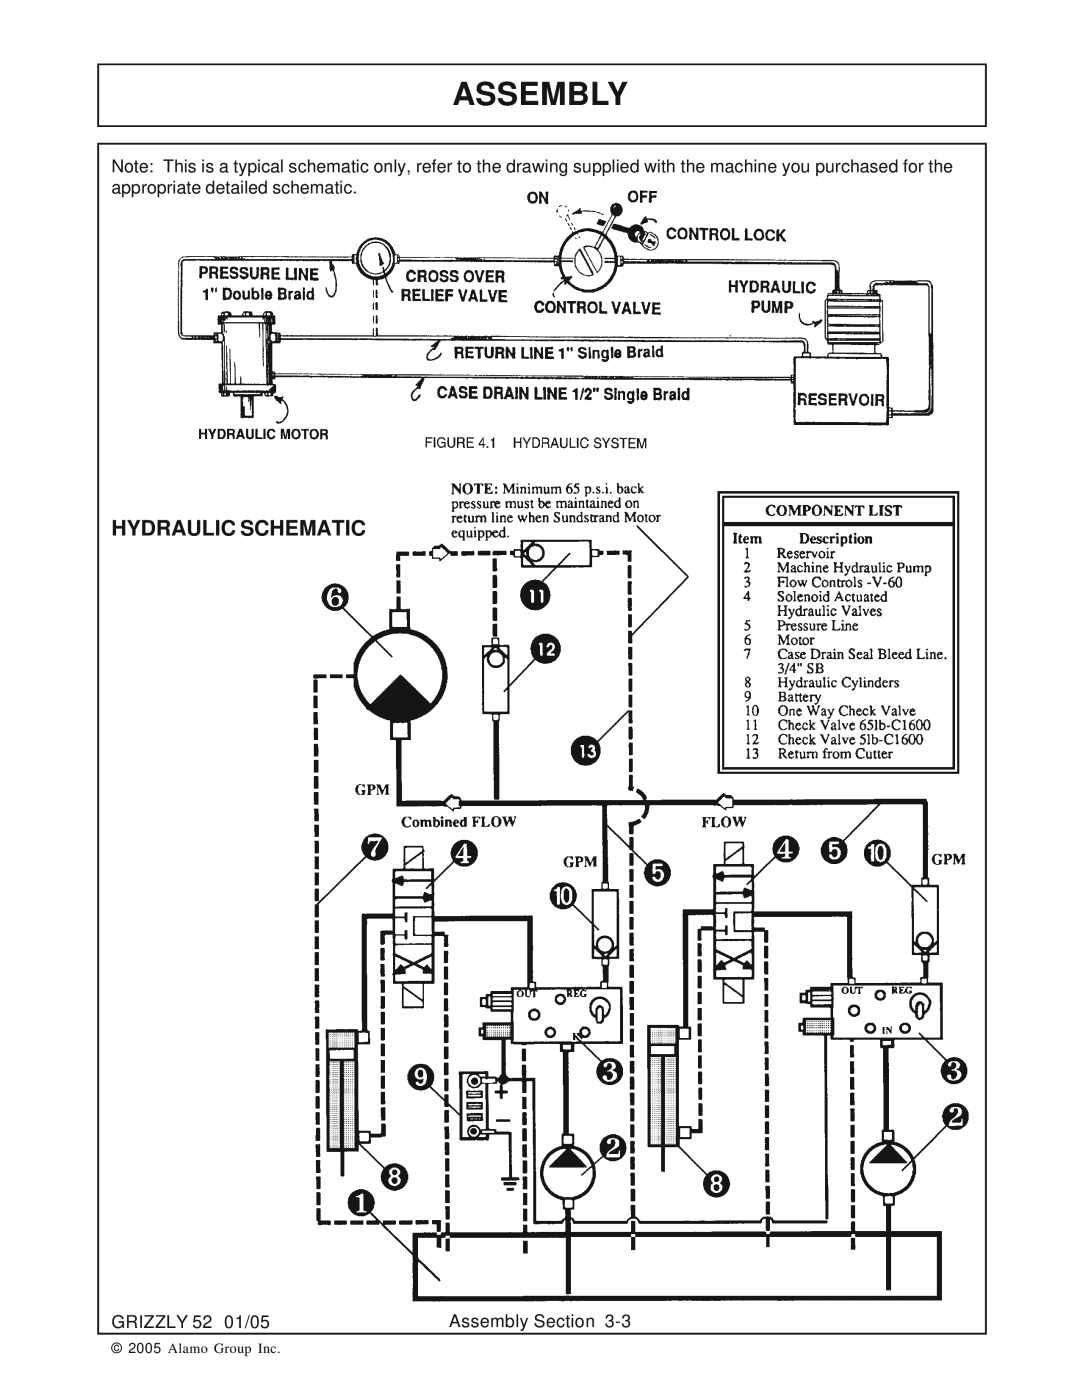 Grizzly 52 manual Assembly, Hydraulic Schematic, Alamo Group Inc 